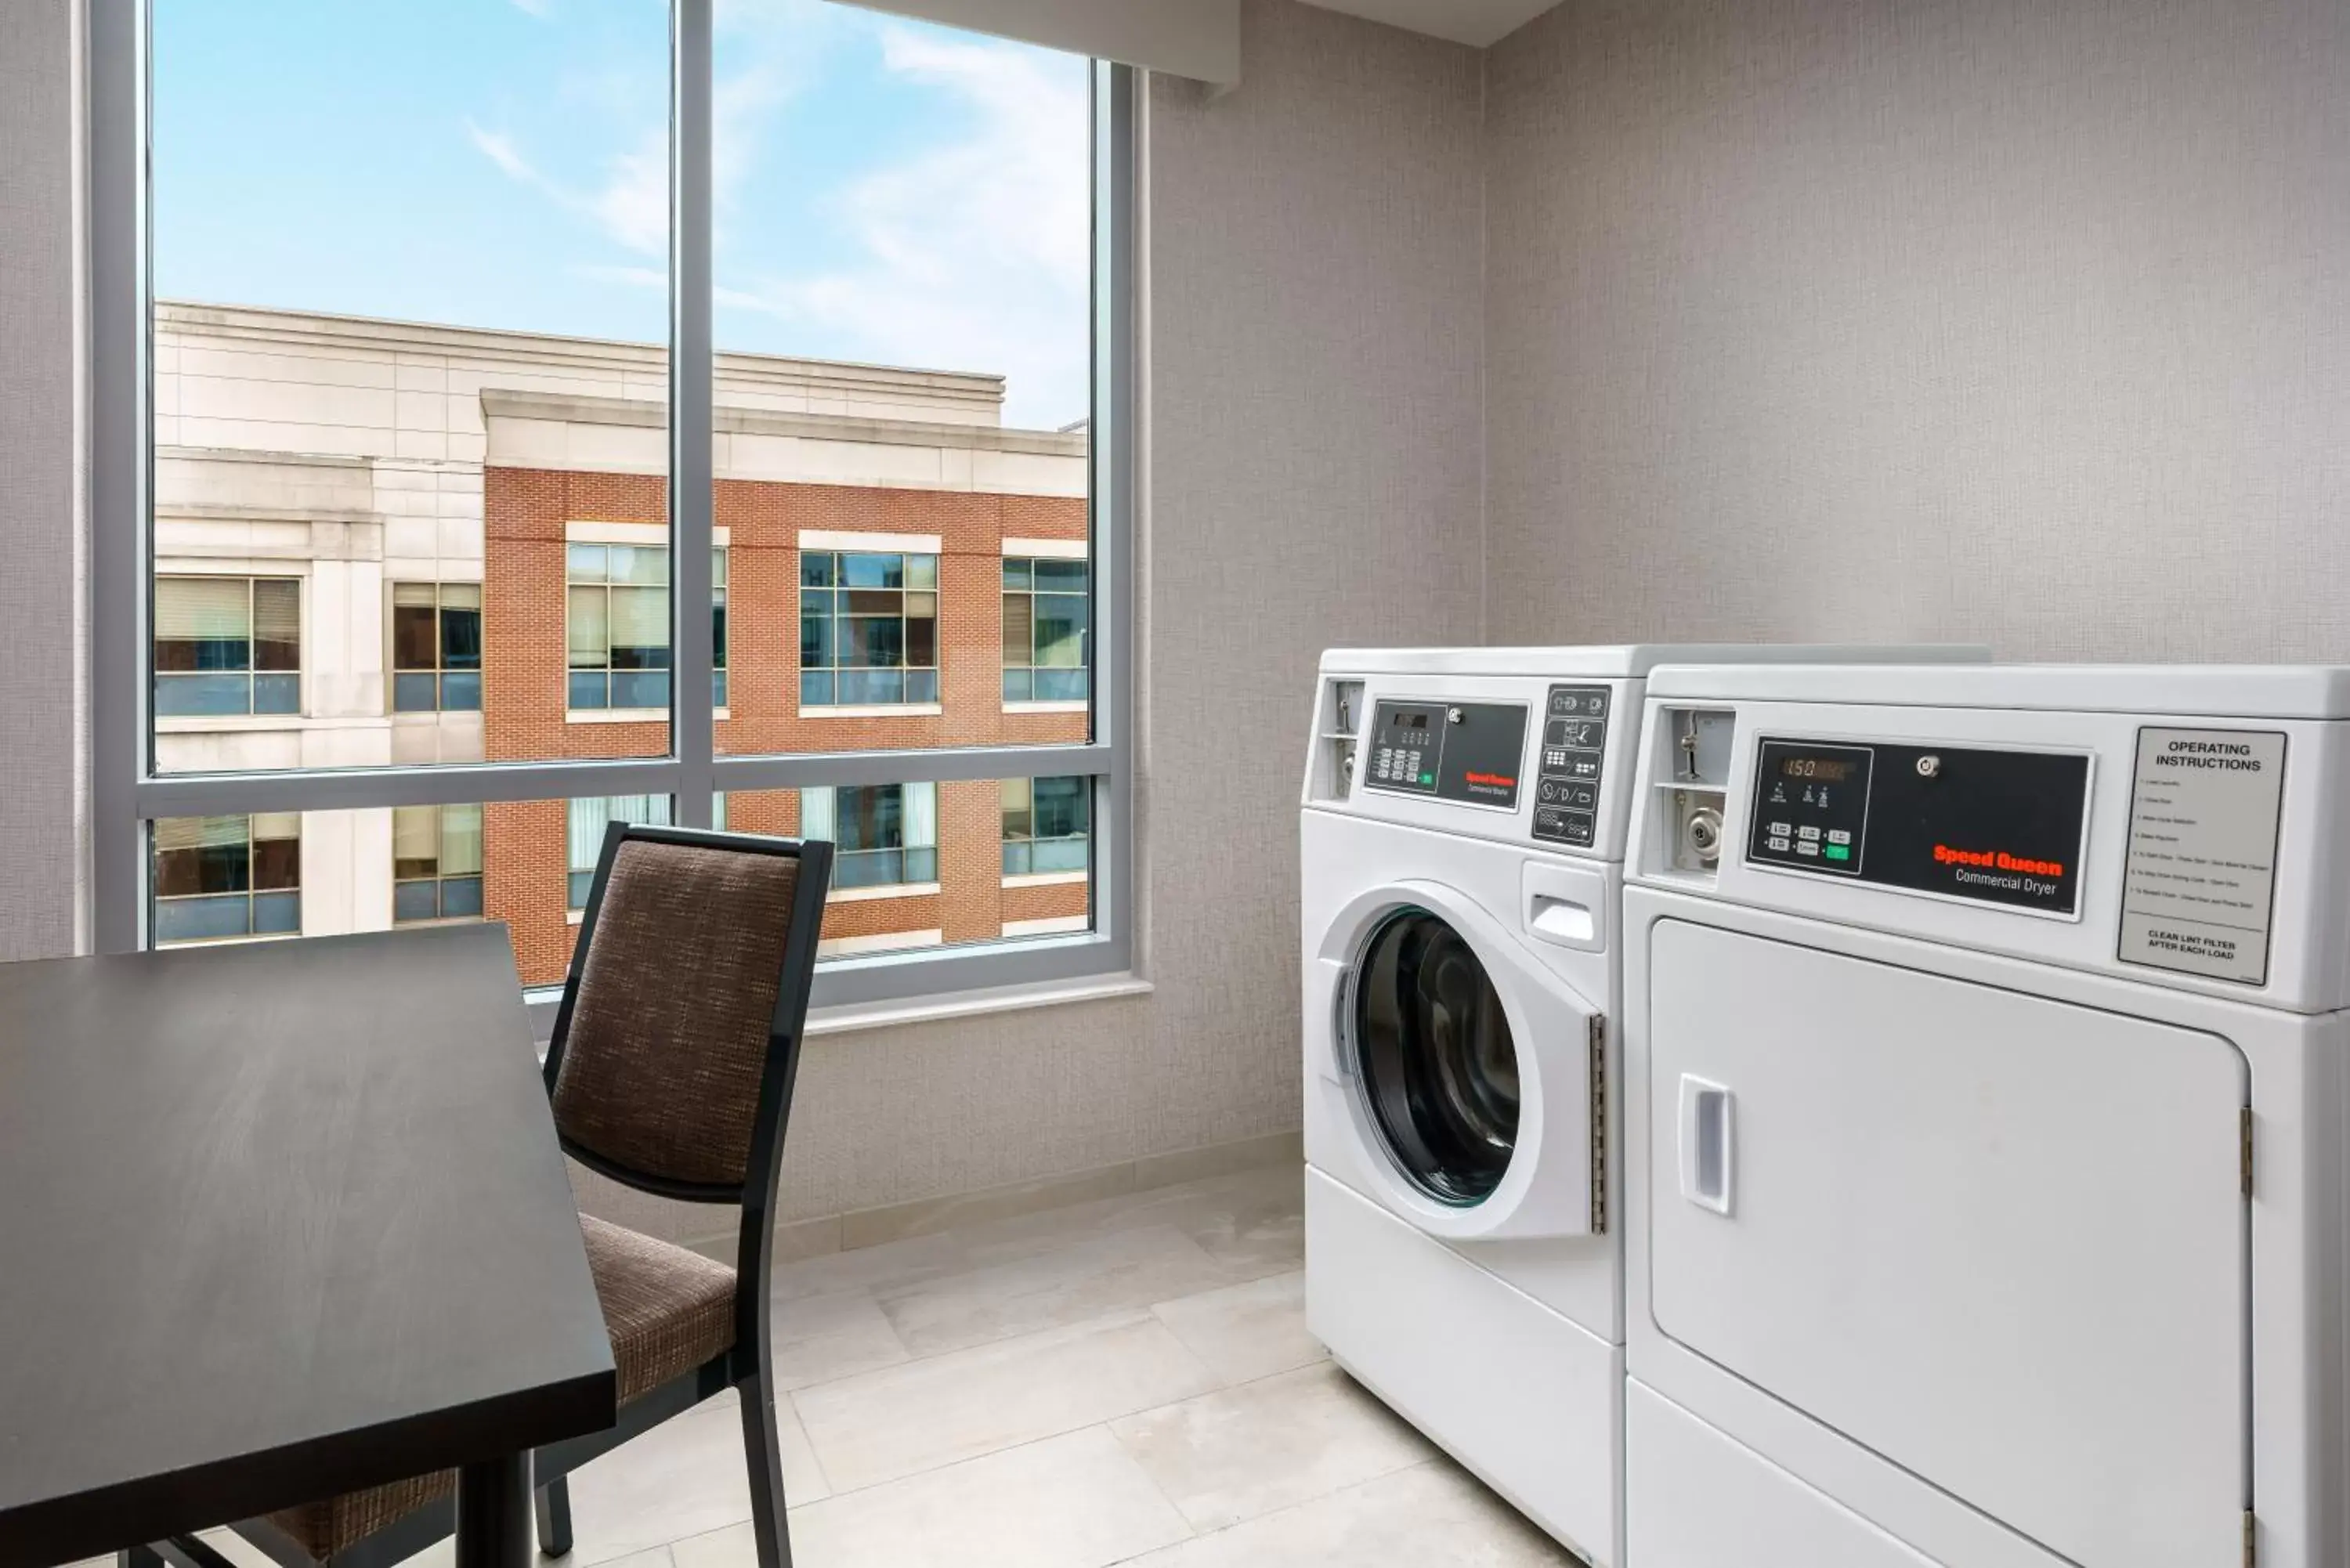 Area and facilities in Hyatt Place National Harbor